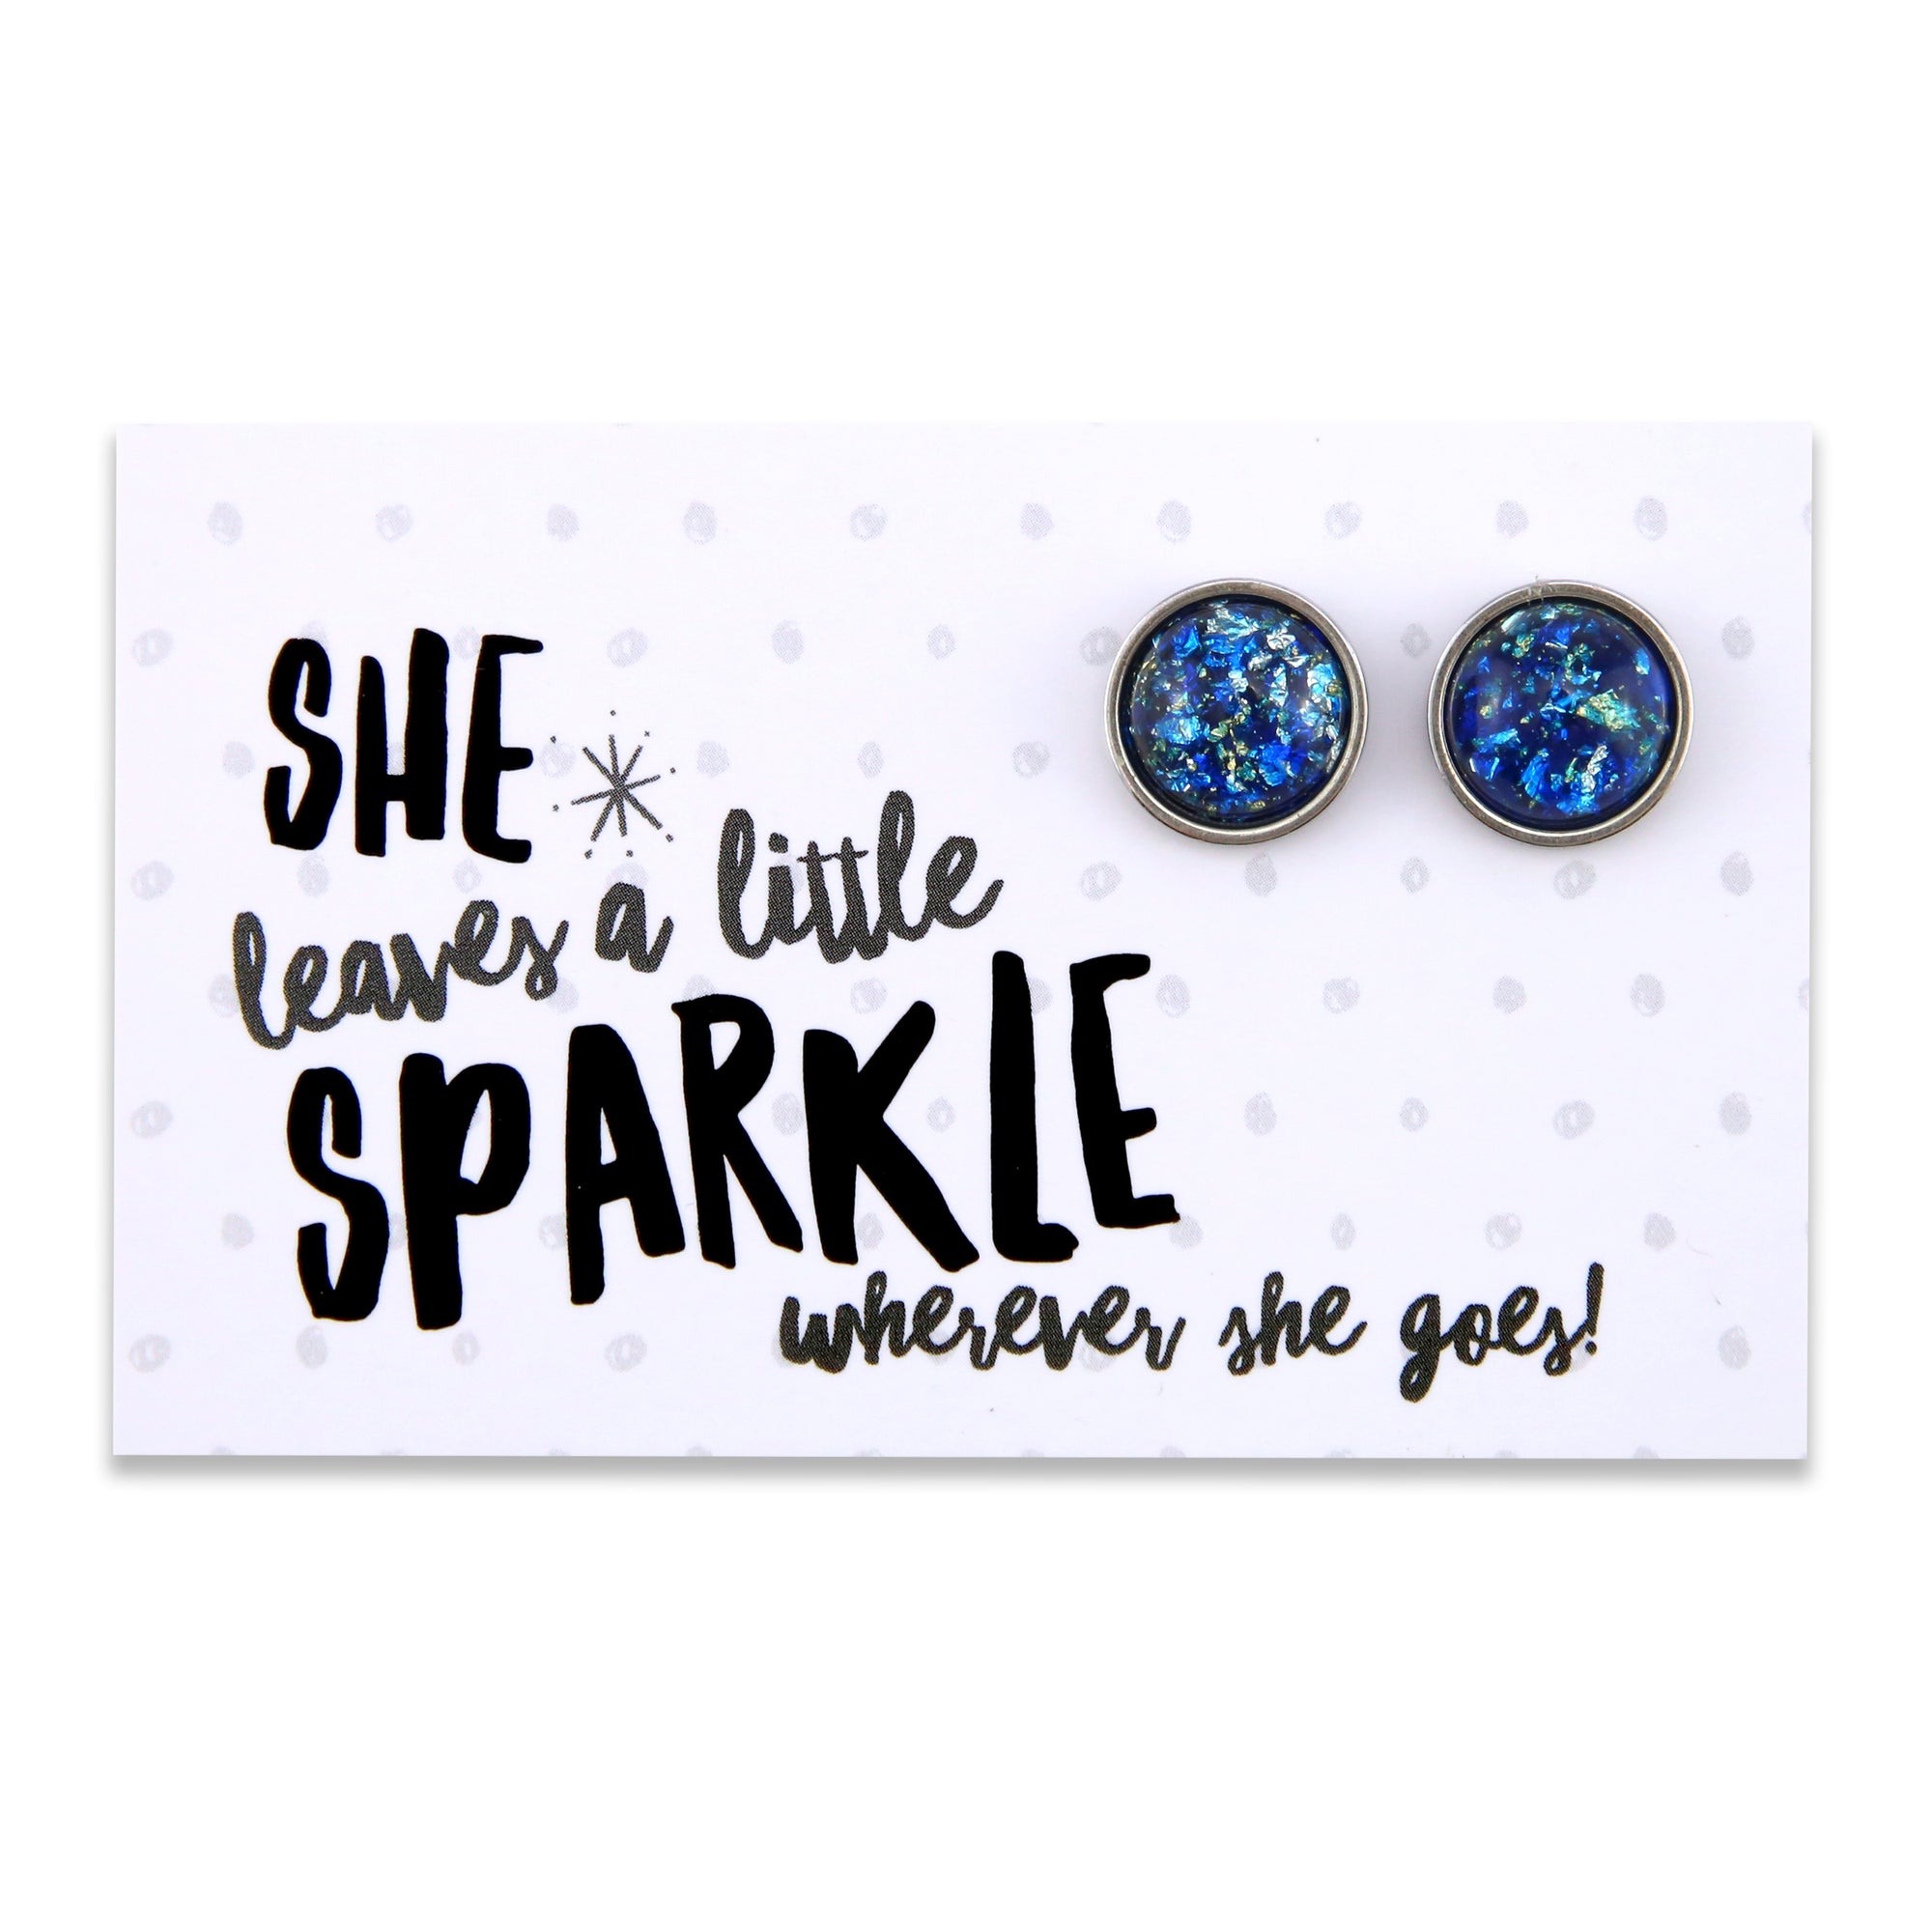 SPARKLEFEST - She Leaves a Little Sparkle - Stainless Steel Silver Studs- Midnight Aqua Leaf (8509-F)